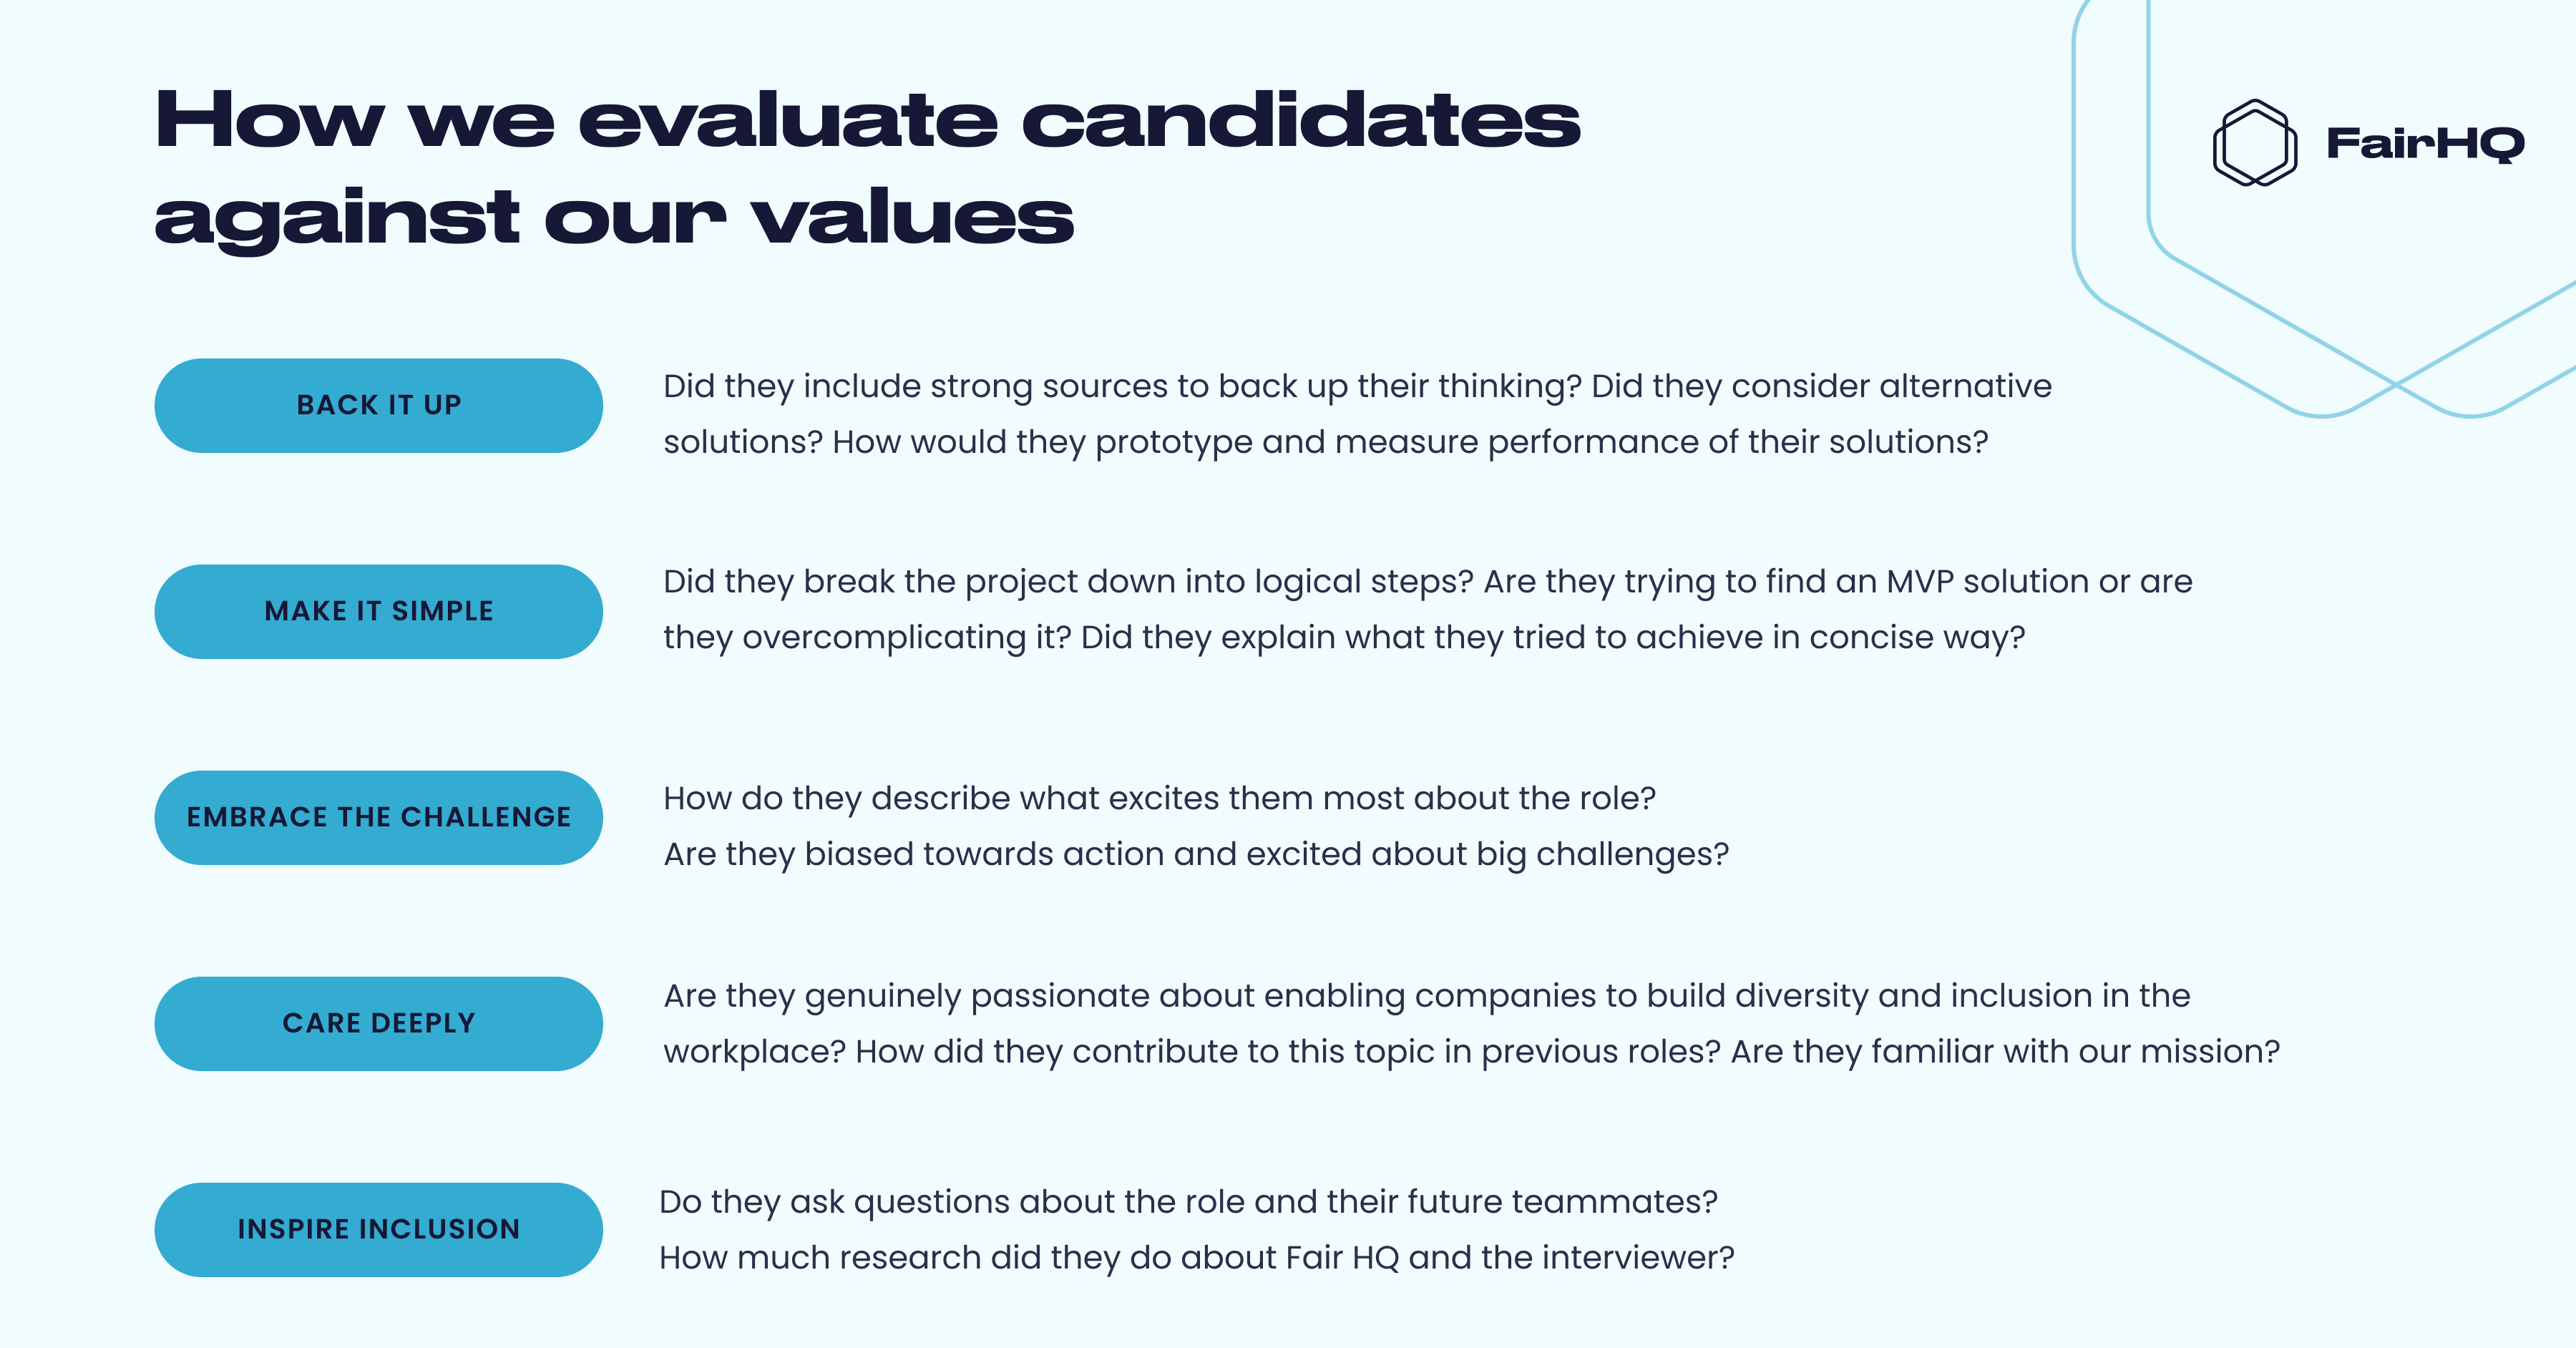 We assess candidates against how well they're aligned with our company values: Back it up, Make it simple, Embrace the challenge, Care deeply and Inspire inclusion.